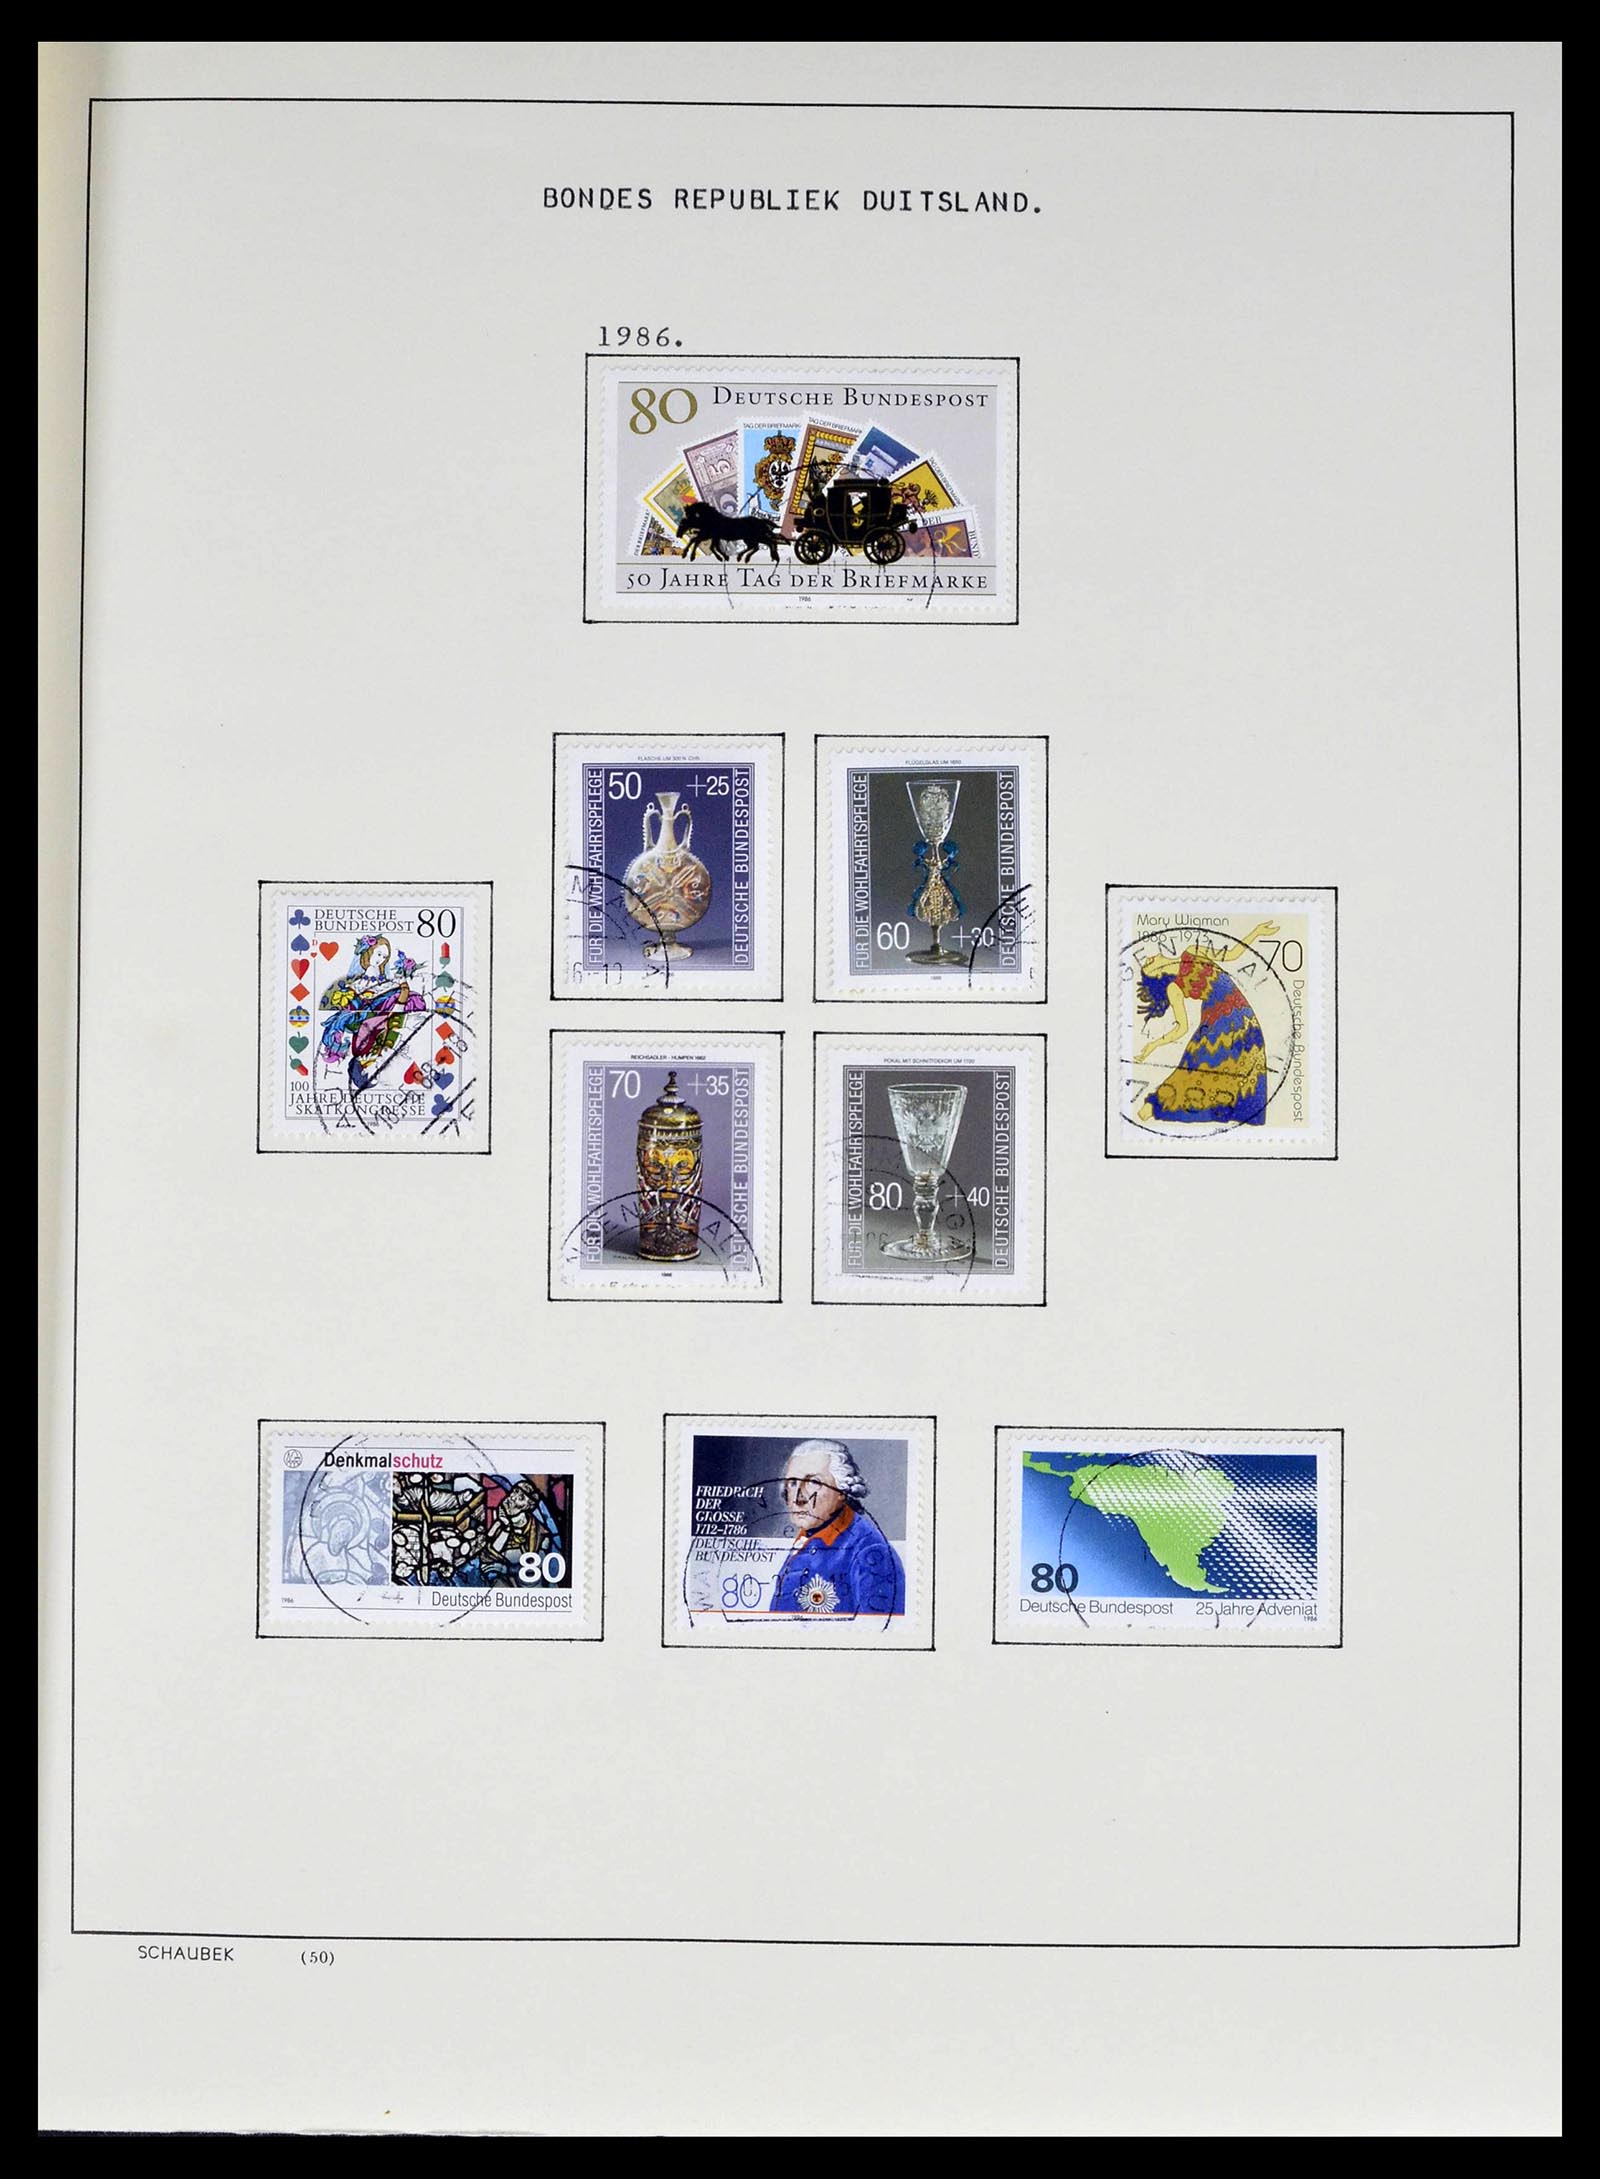 39324 0005 - Stamp collection 39324 Bundespost 1986-2012.